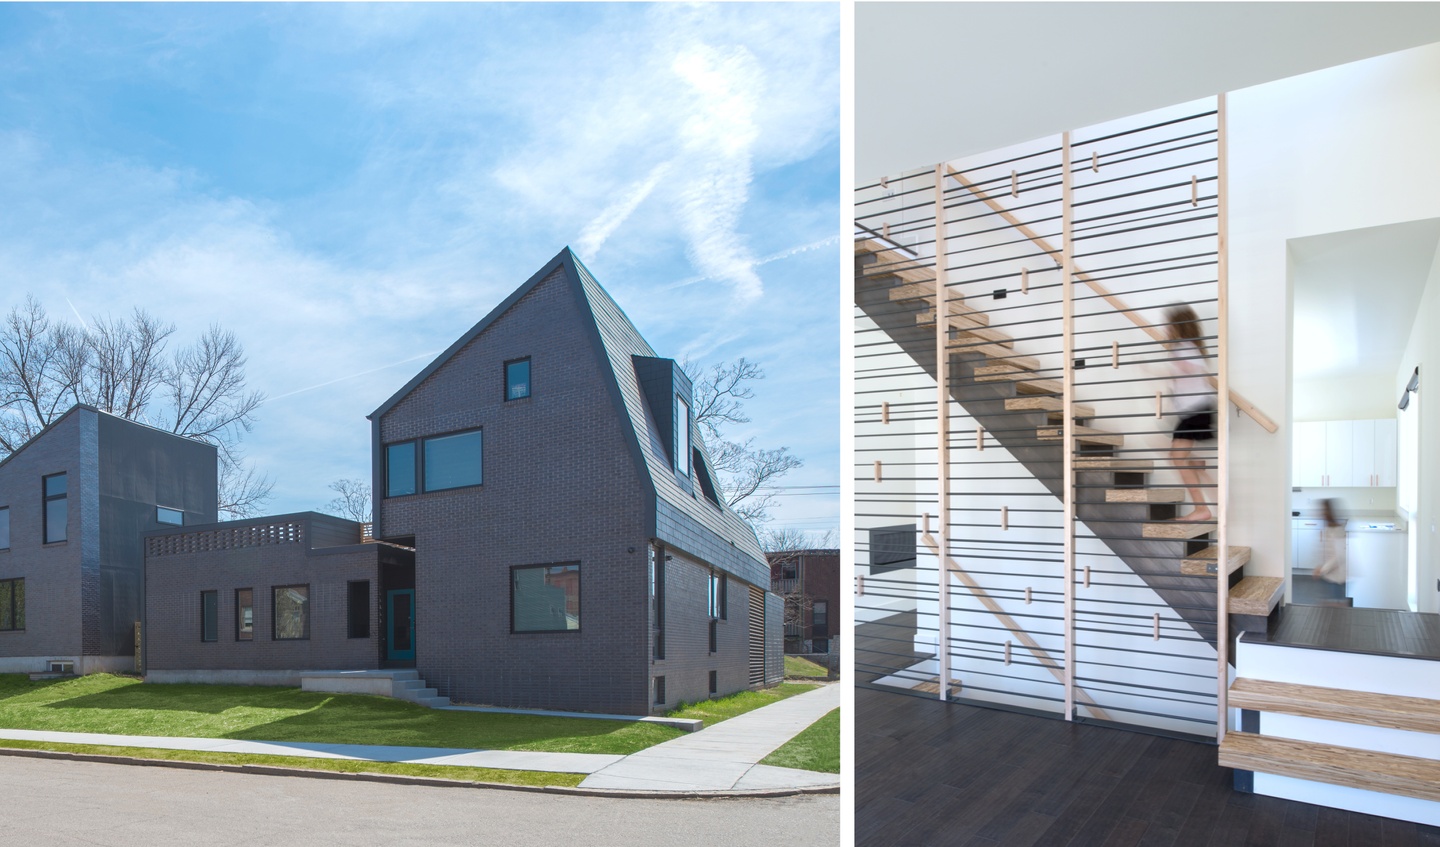 An exterior image of entry and interior image of stair of a built house